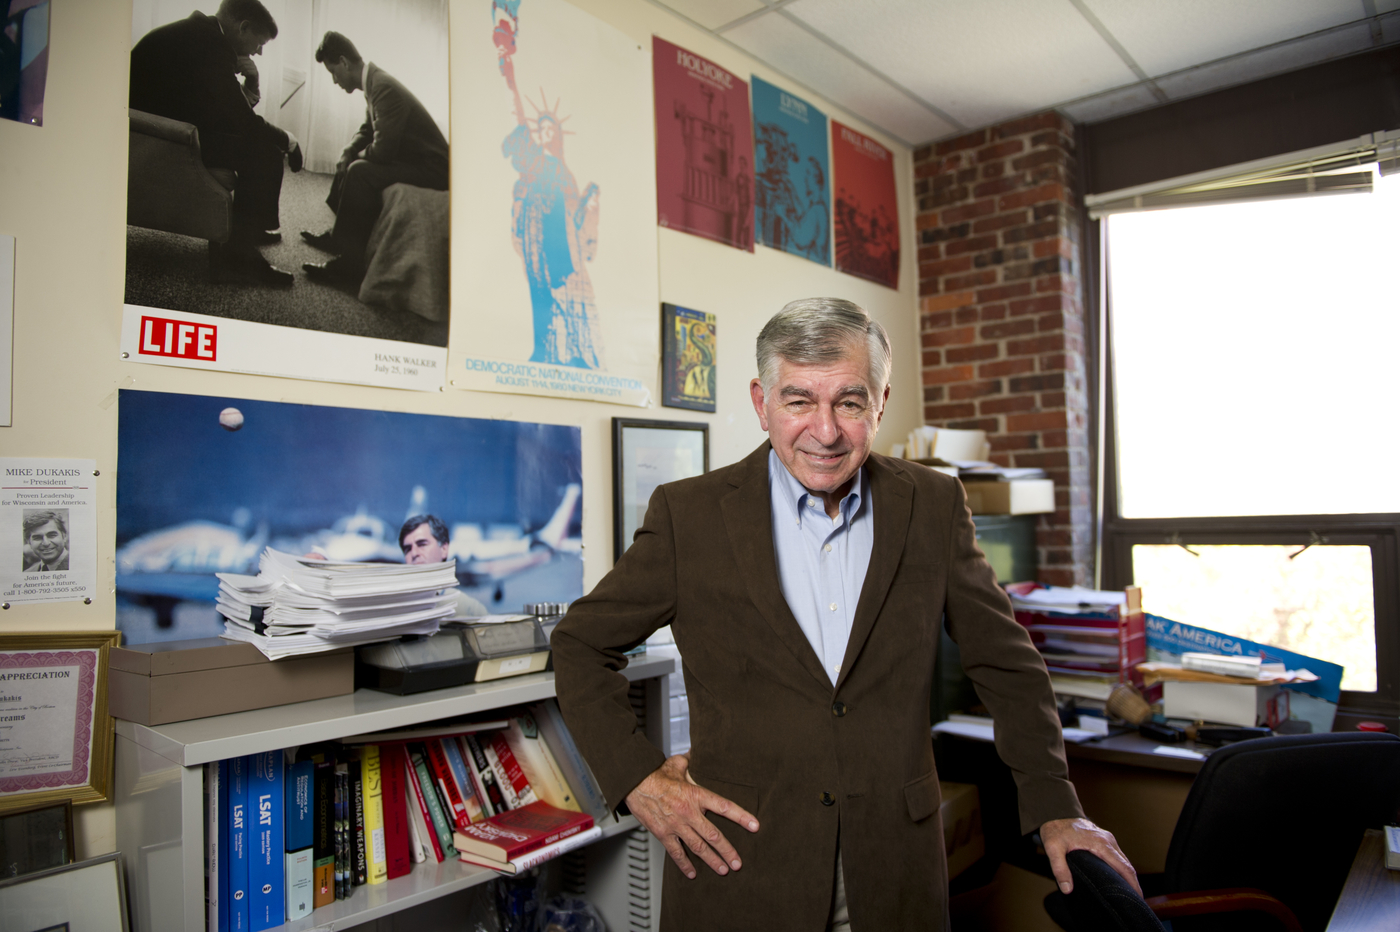 Picture of Professor Michael Dukakis in his office at Northeastern University. He is smiling and surrounded by posters and books on modern political science.